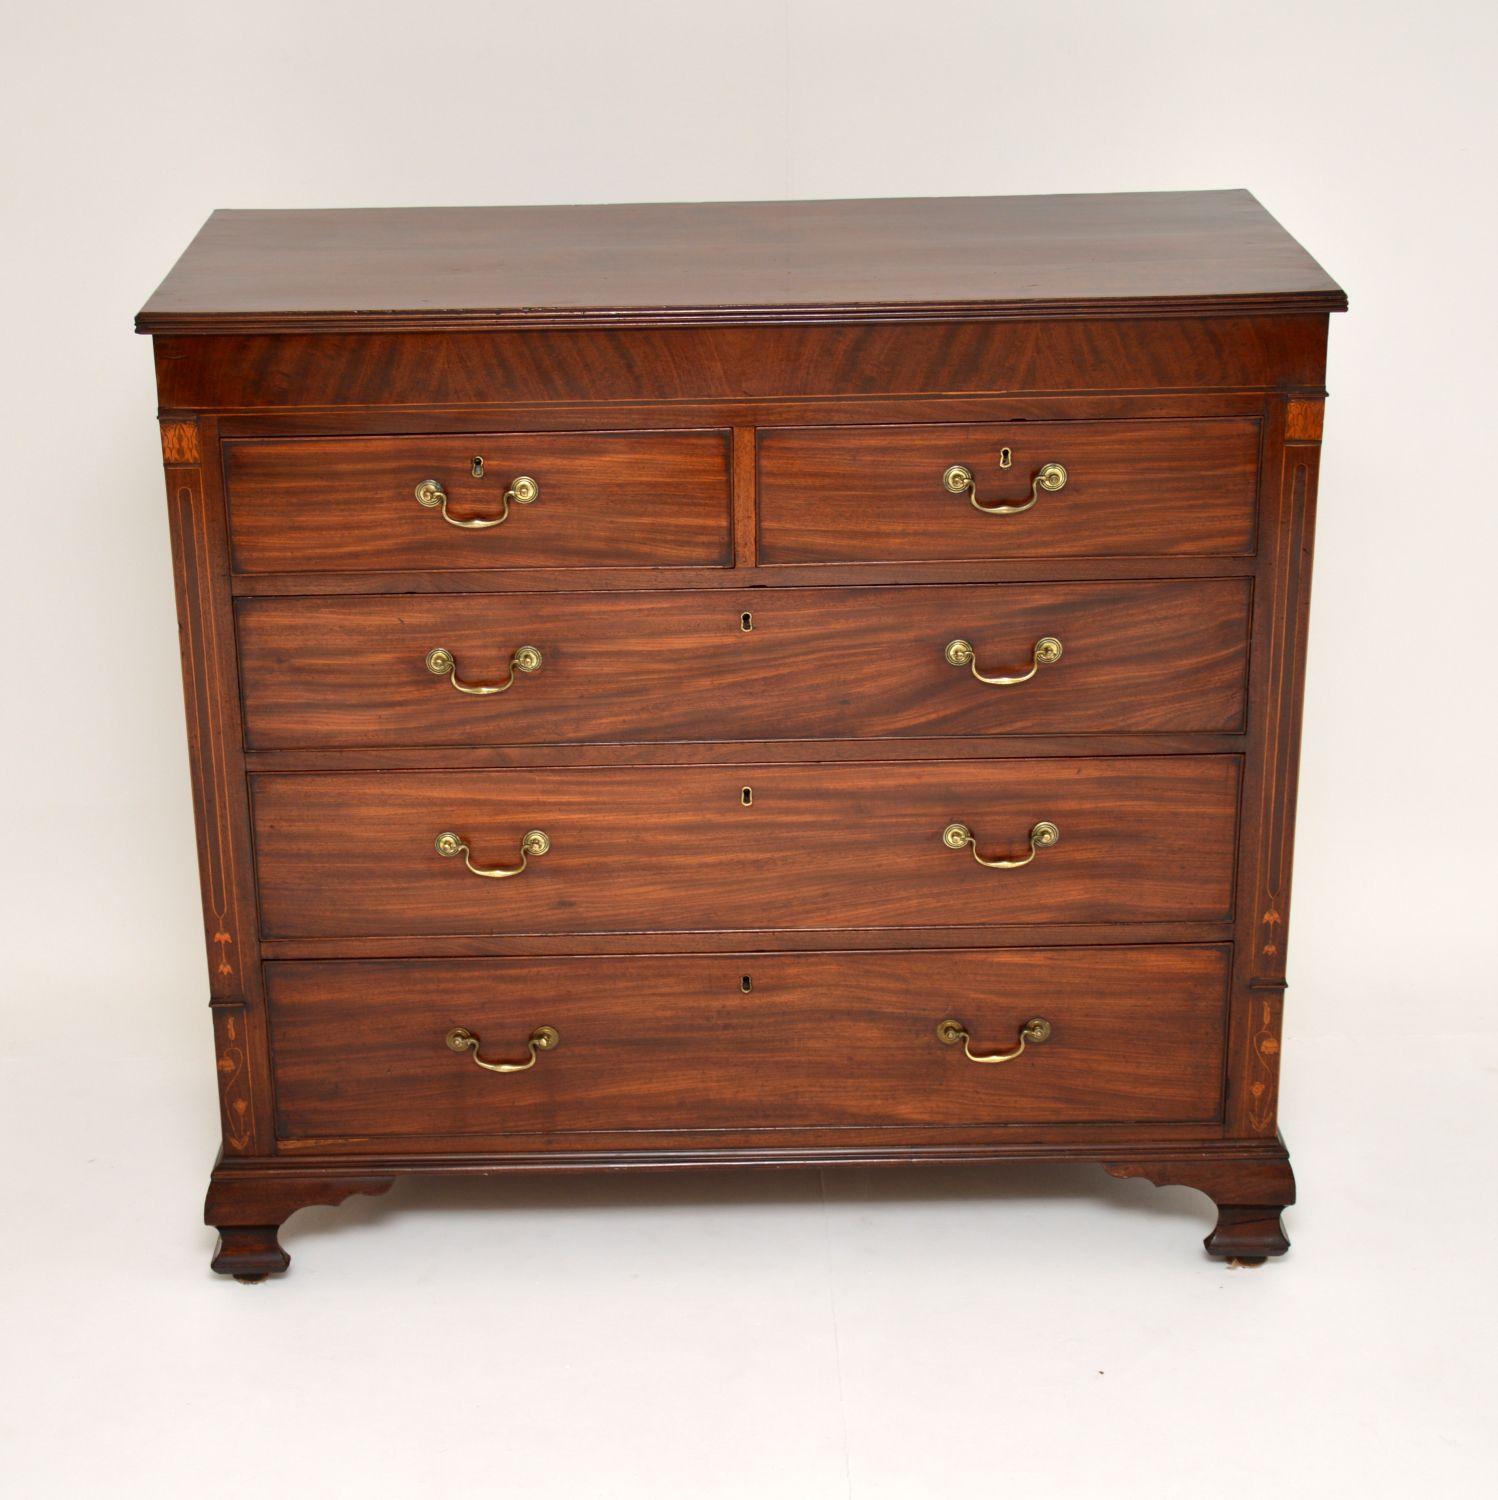 Large impressive antique George III mahogany chest of drawers with fine satinwood inlays and in excellent condition.

It has a reeded top edge, deep drawers all of which are graduated in depth and sits on ogee bracket feet. The side corners are